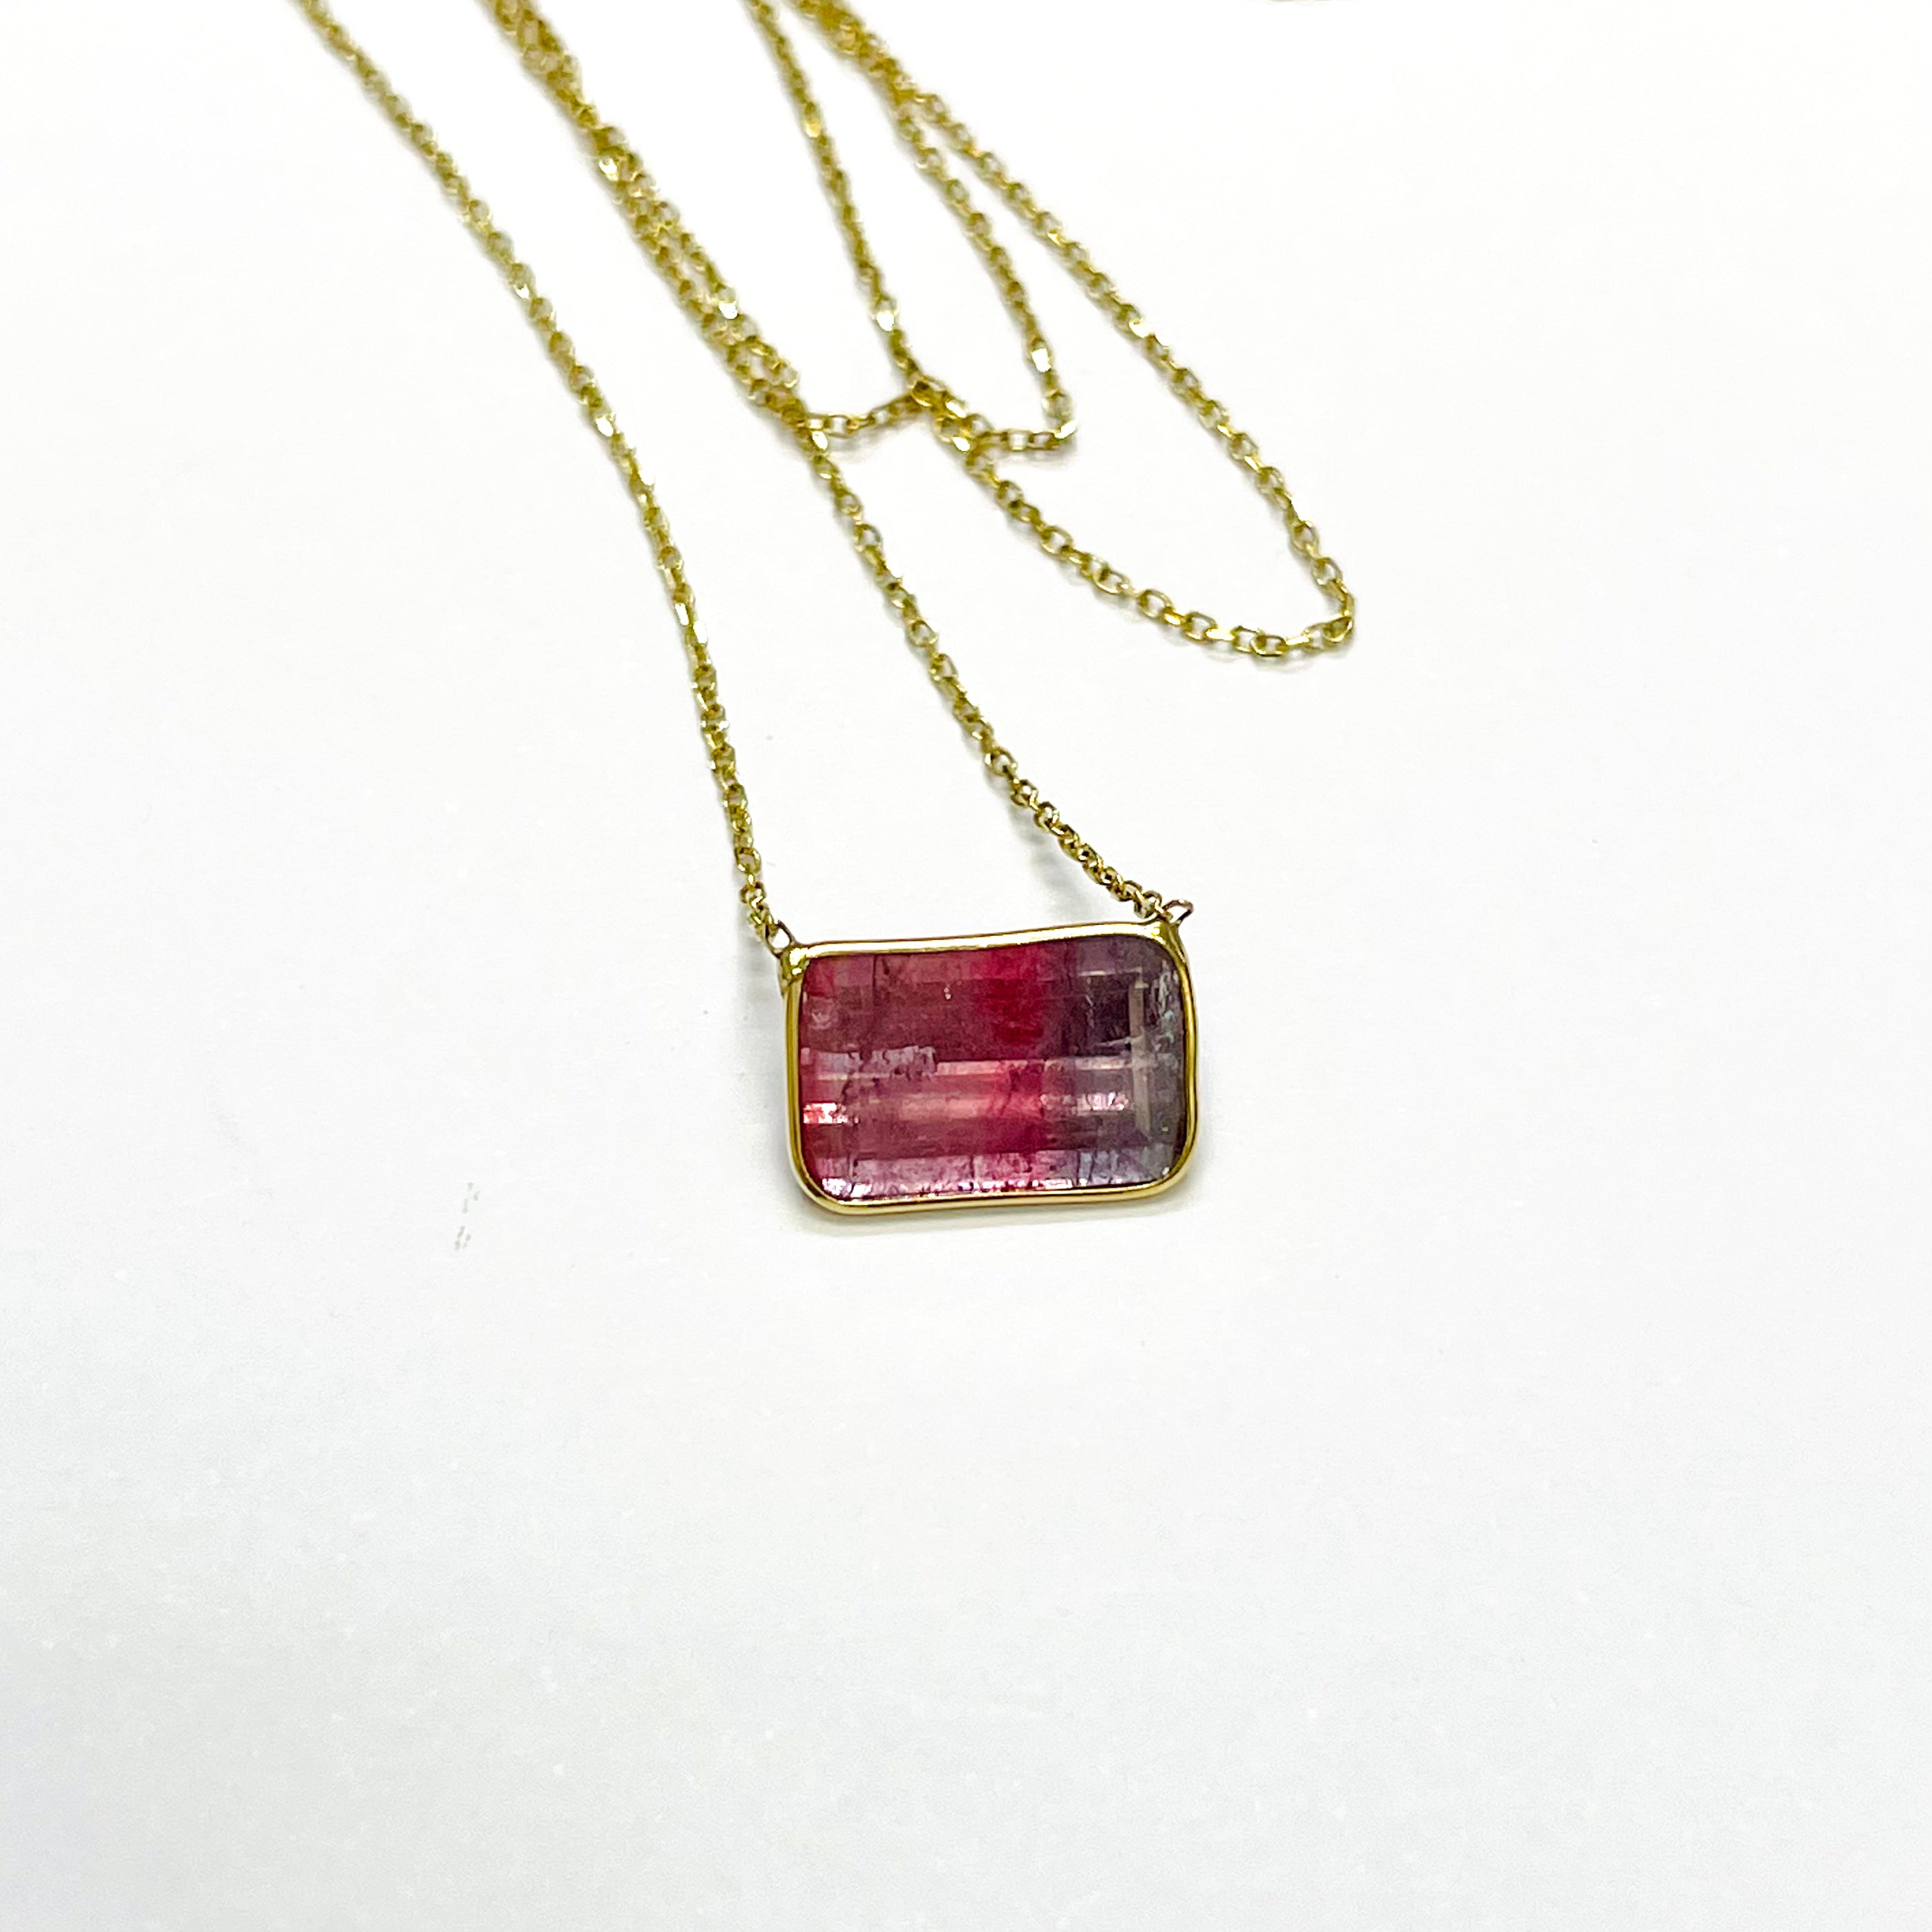 Bicolor Tourmaline Necklace in 14k Yellow Gold